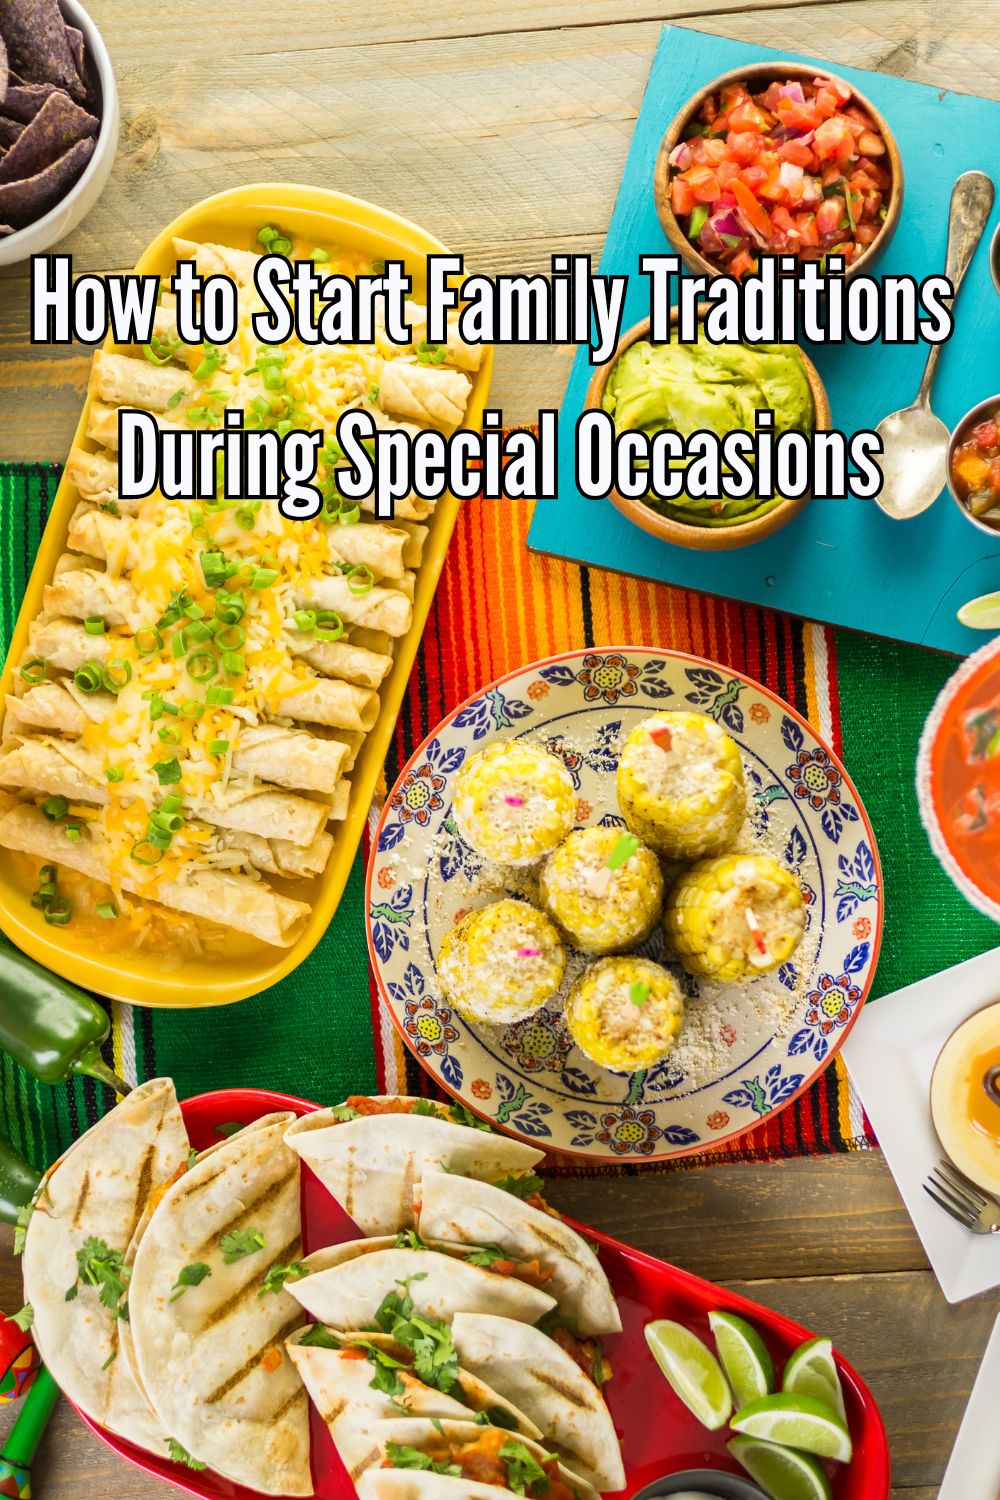 How to Start Family Traditions during Special Occasions